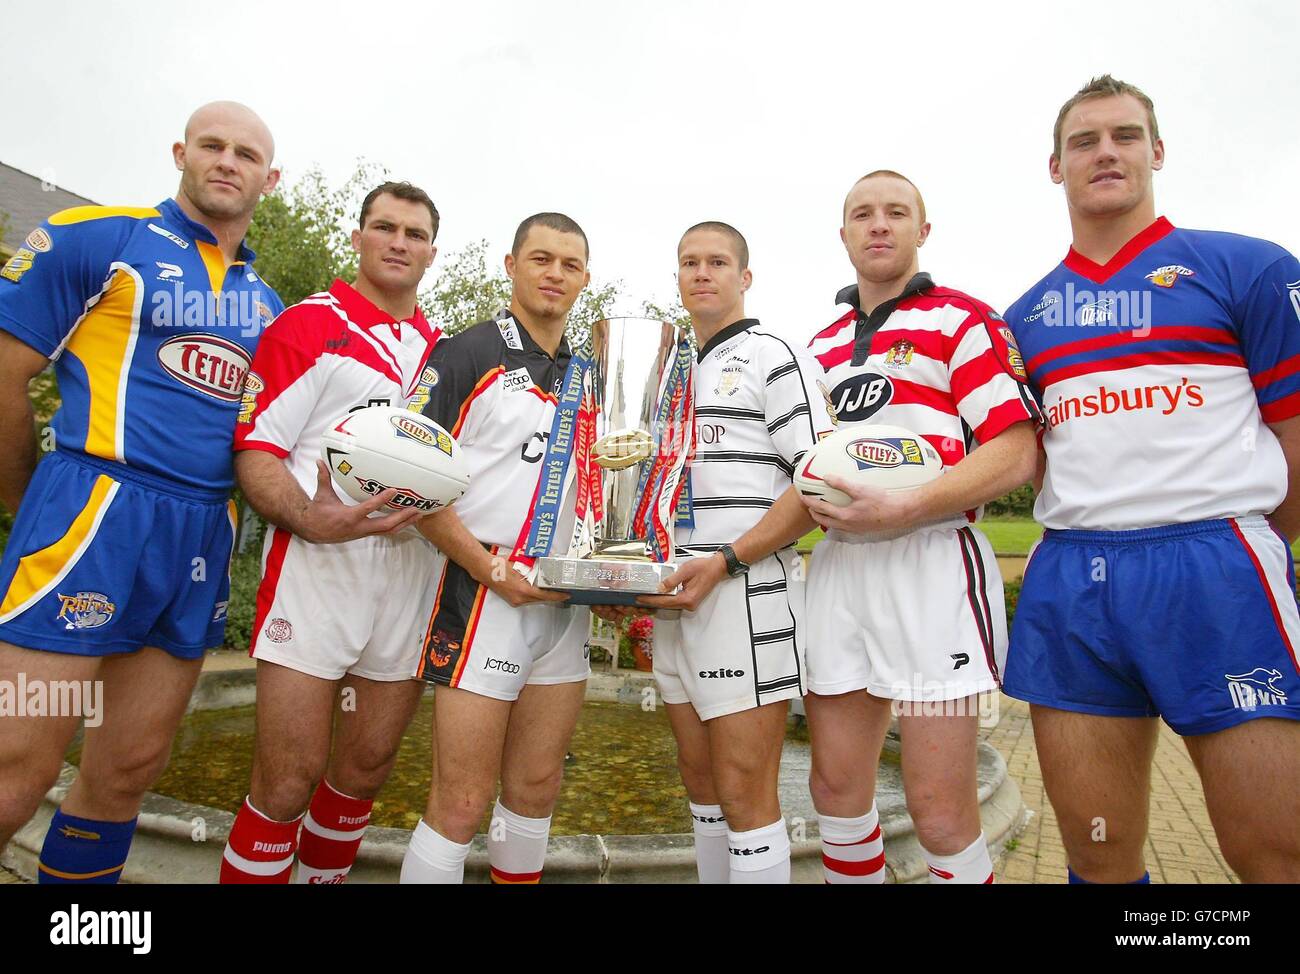 The launch of the Tetley's Superleague Playoffs (Left to right) Keith Senior (Leeds), Jason Hooper (St Helens), Robbie Paul (Bradford), Richard Swain (Hull), Kris Radlinski (Wigan) and Gareth Ellis (Wakefield) pictured during a photocall at the Holiday Inn, Brighouse. Stock Photo